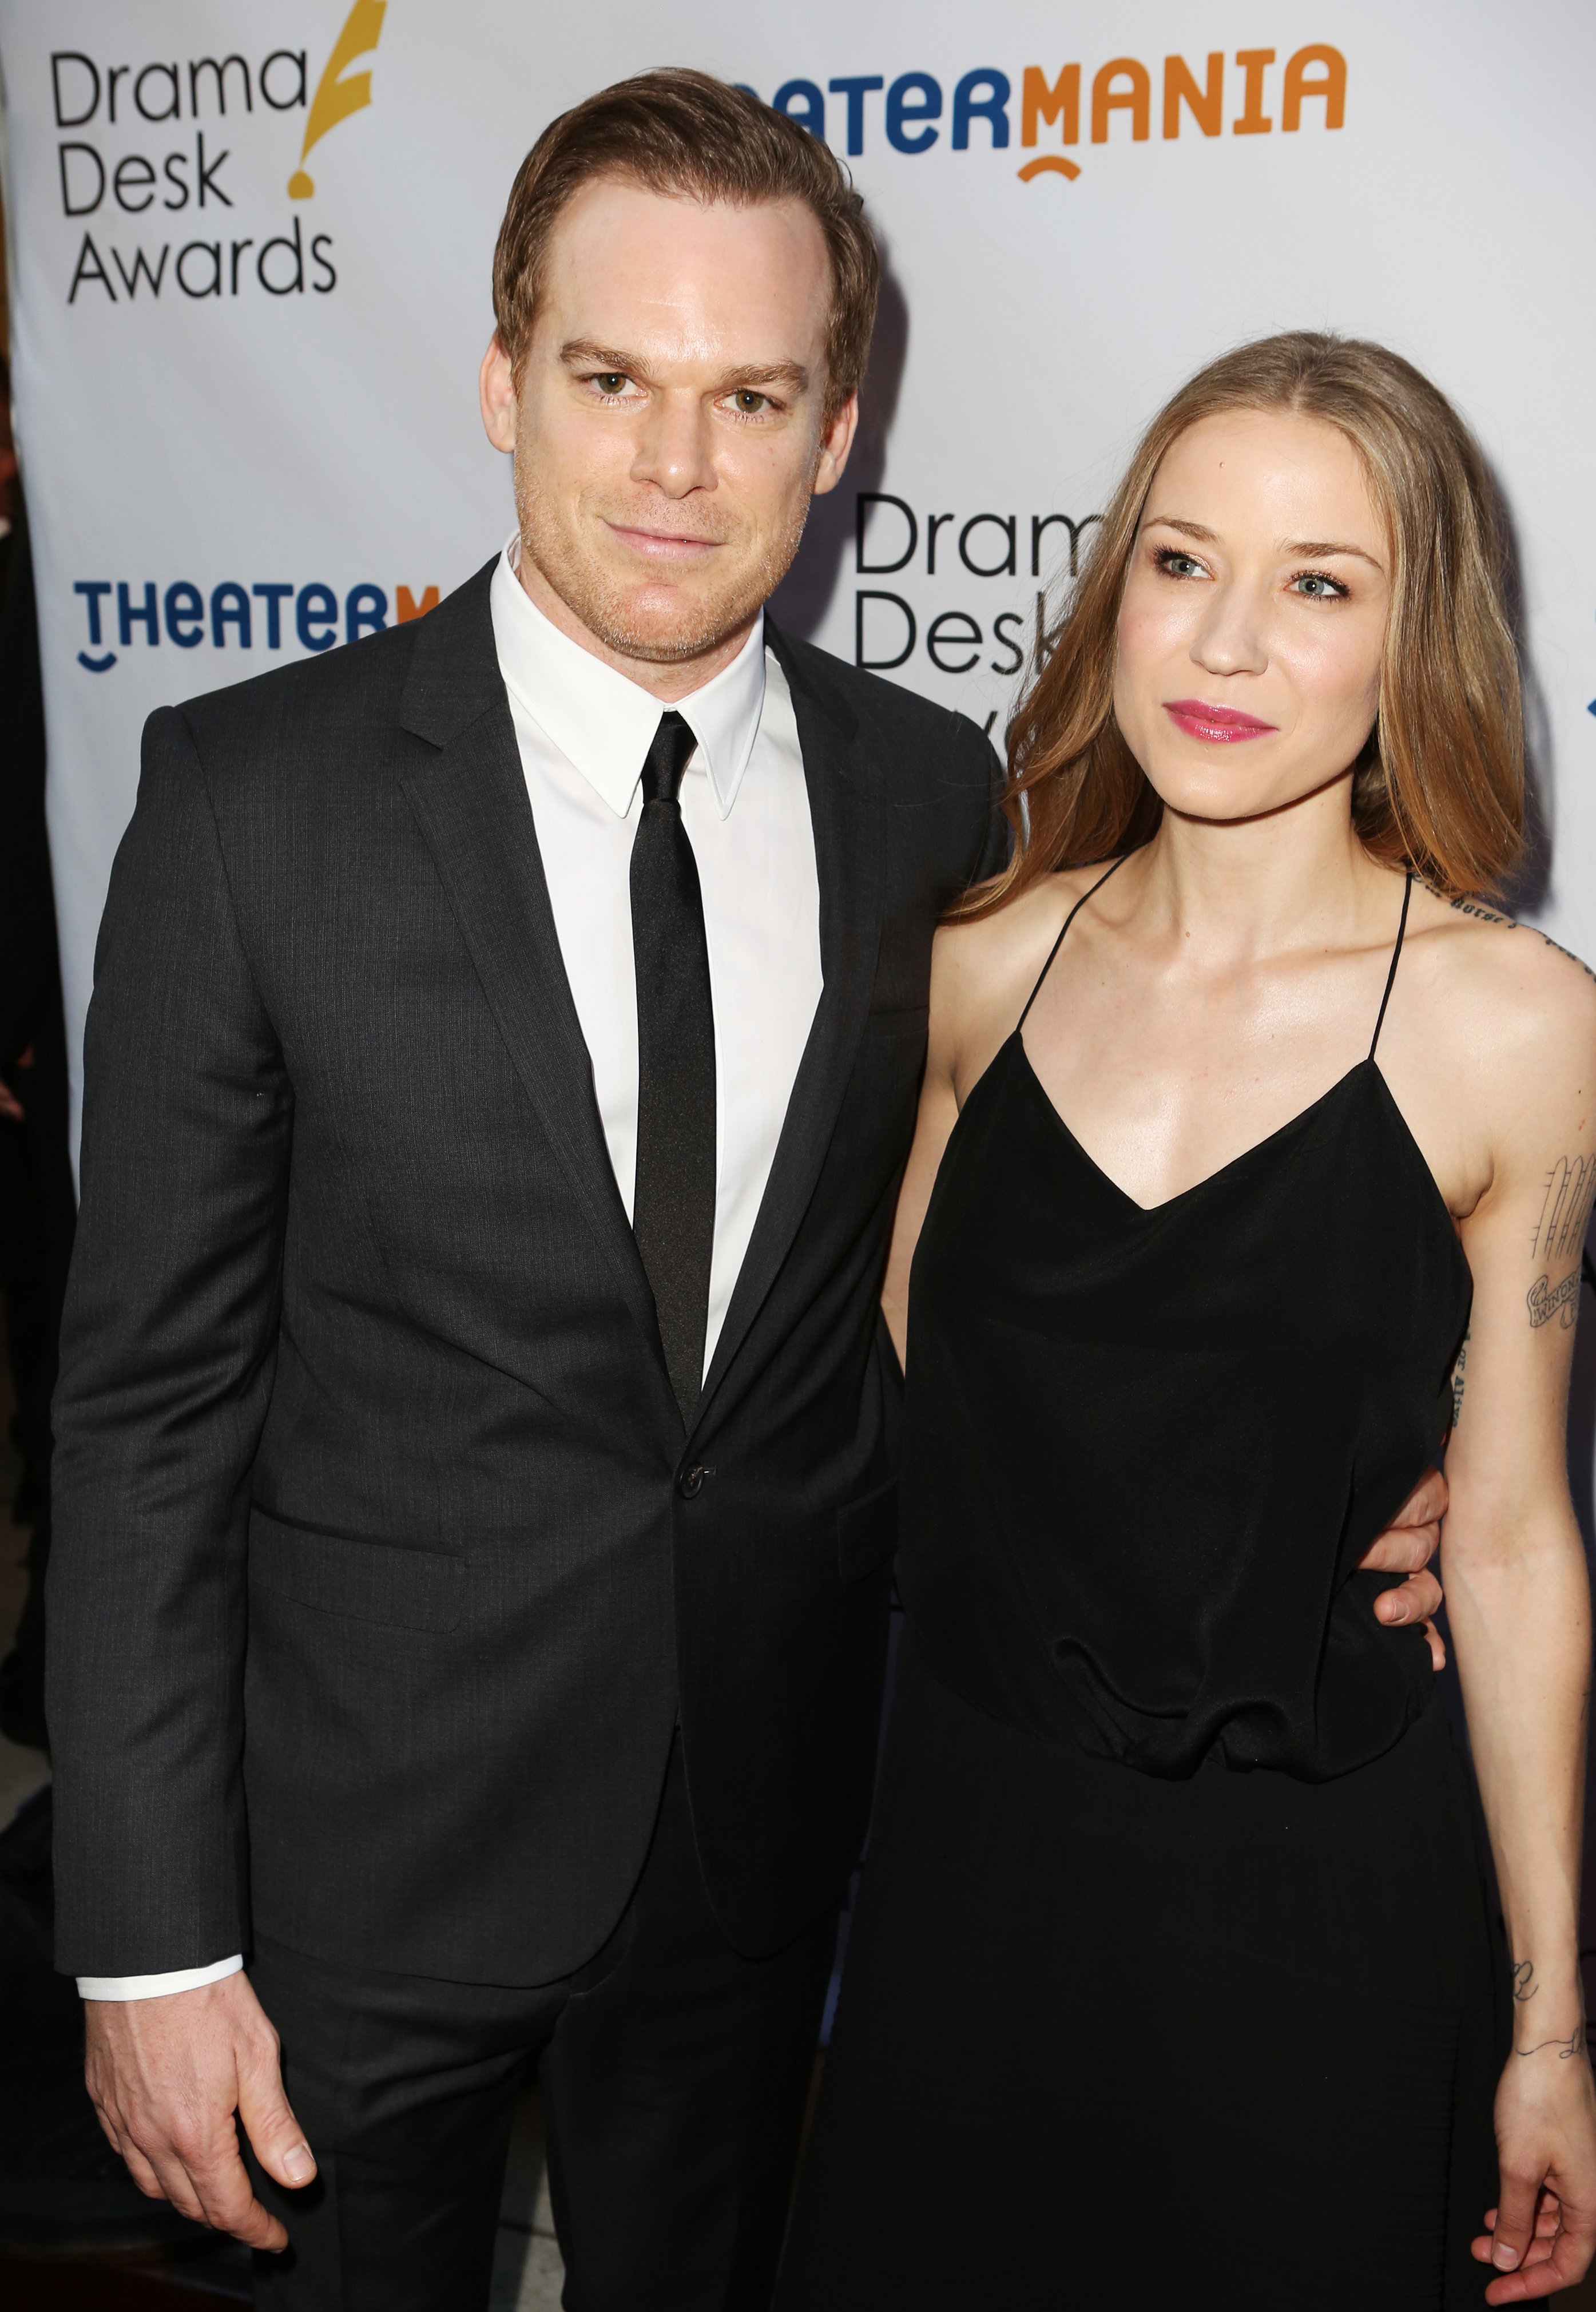 Michael C. Hall and Morgan MacGregor pose for photos at the 2014 Drama Desk Awards on June 1, 2014 in New York City | Source: Getty Images